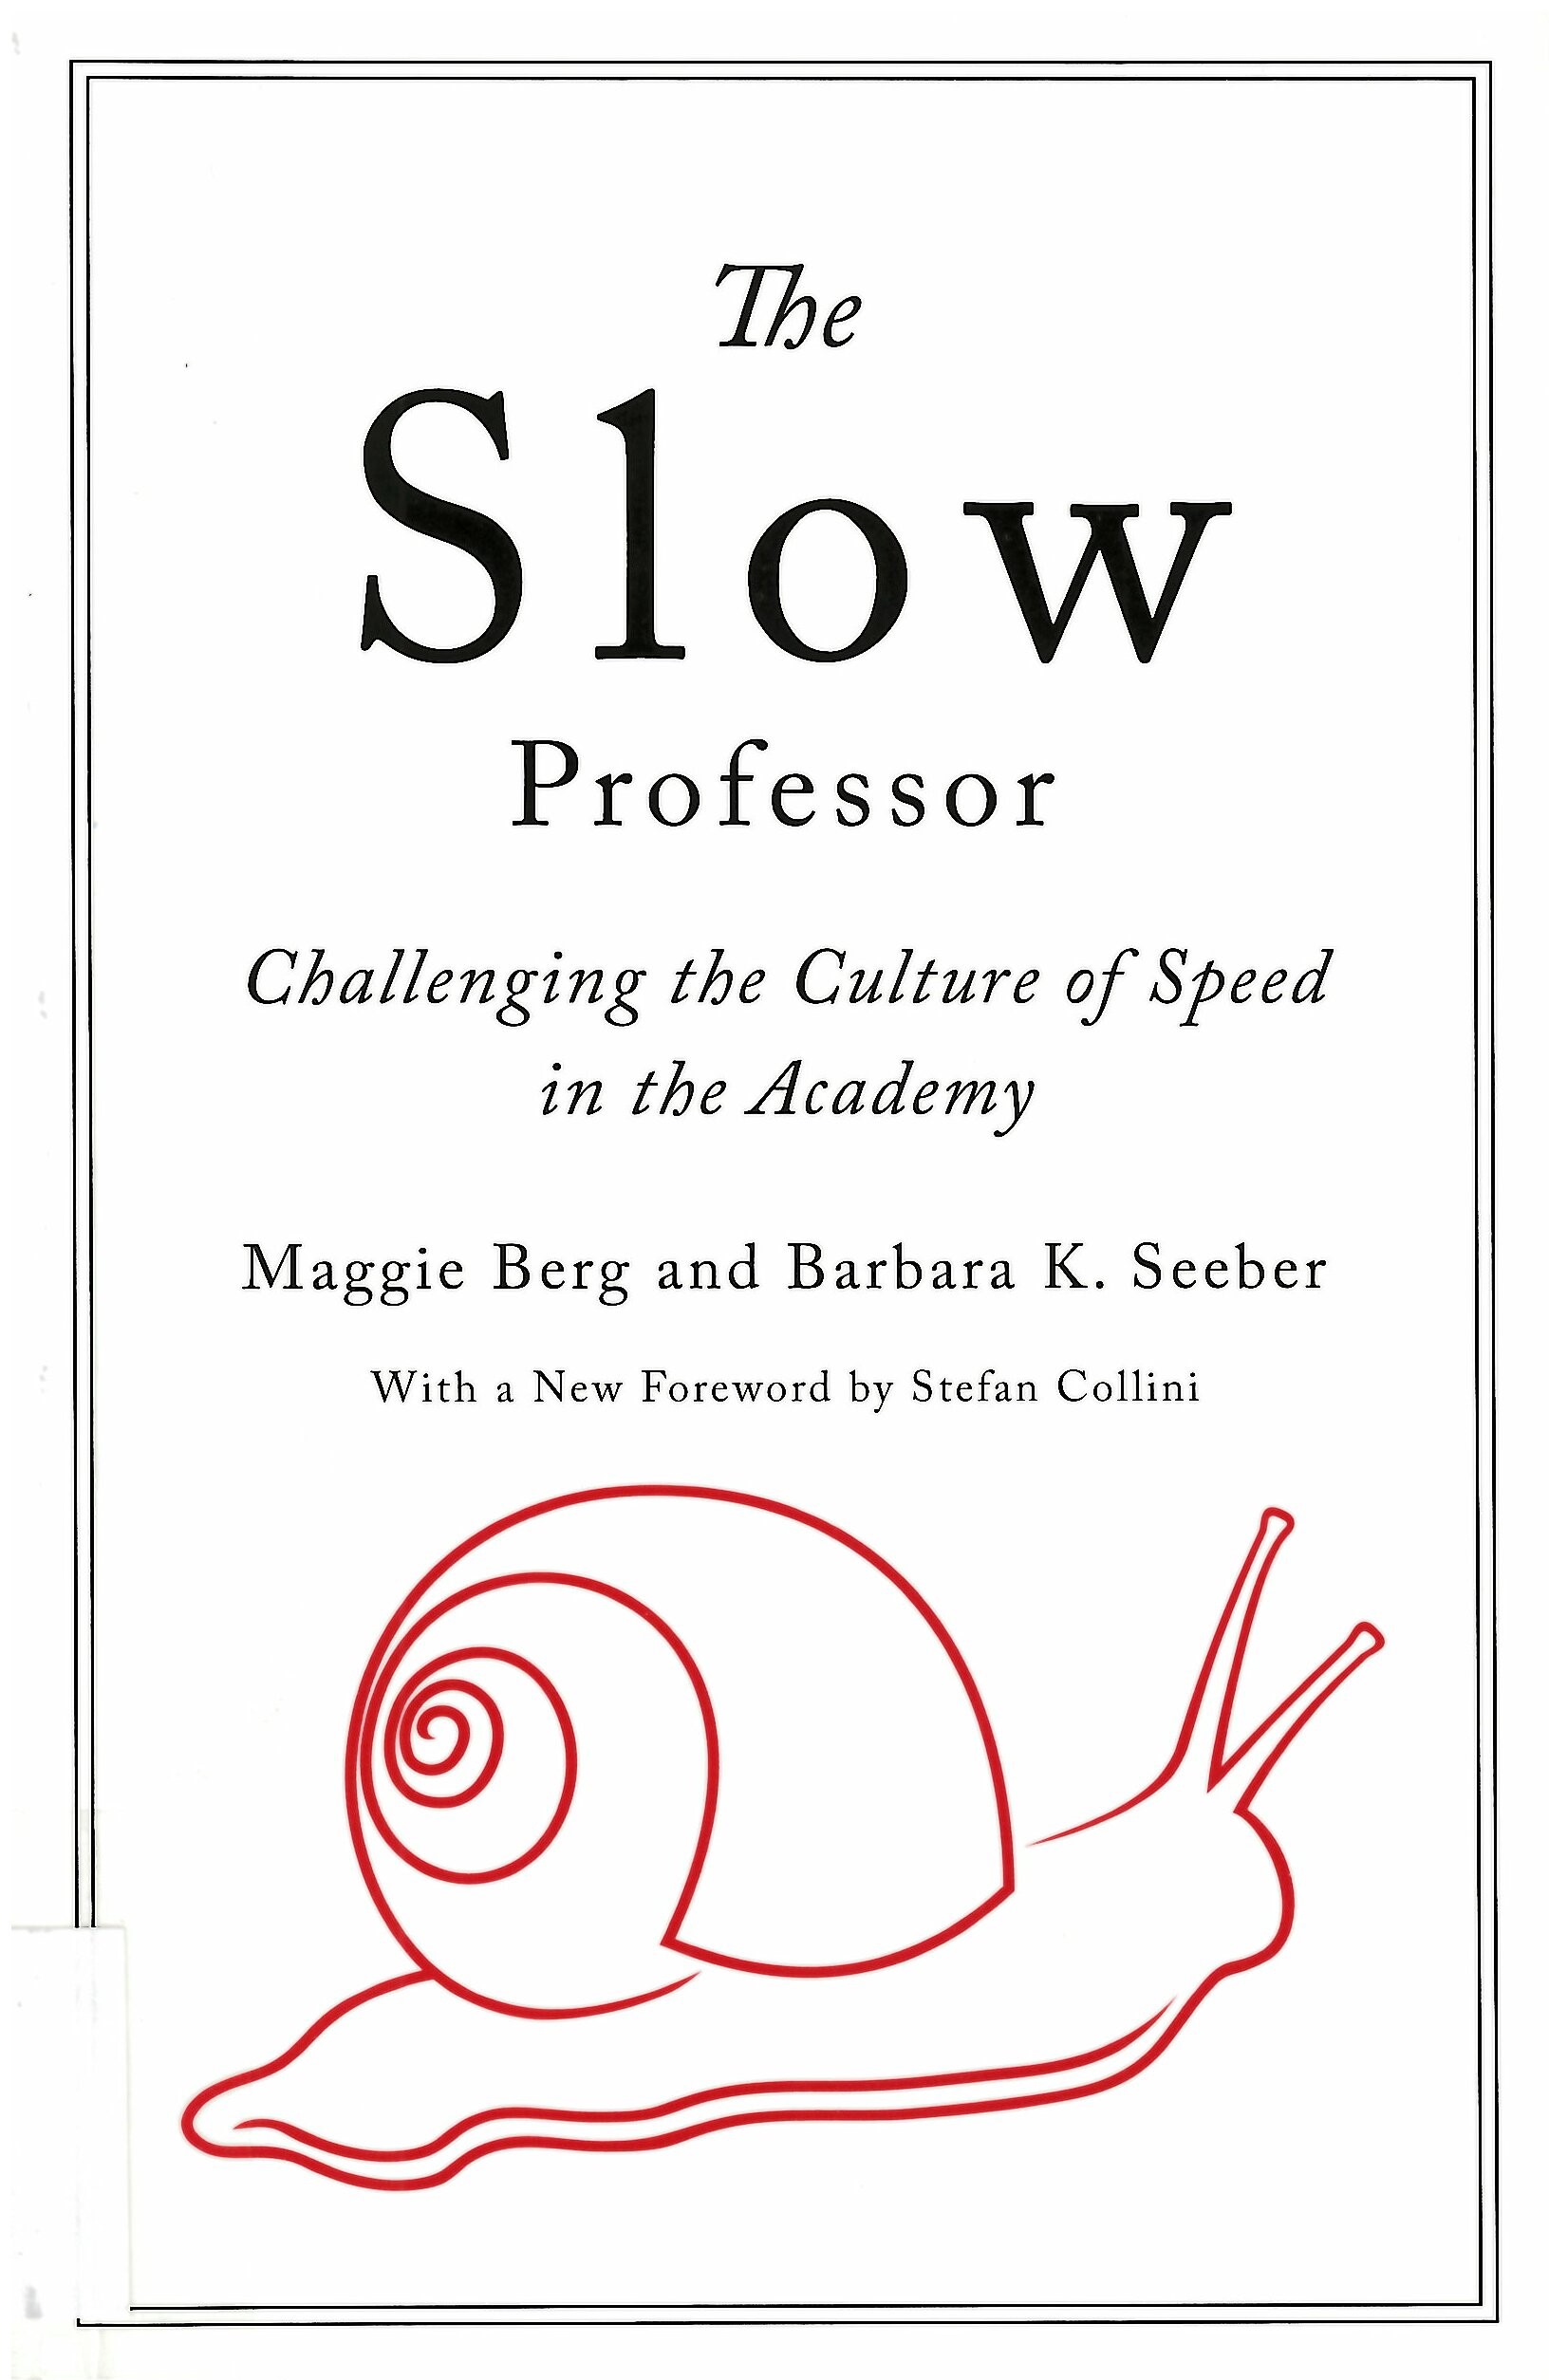 The slow professor : challenging the culture of speed in the academy